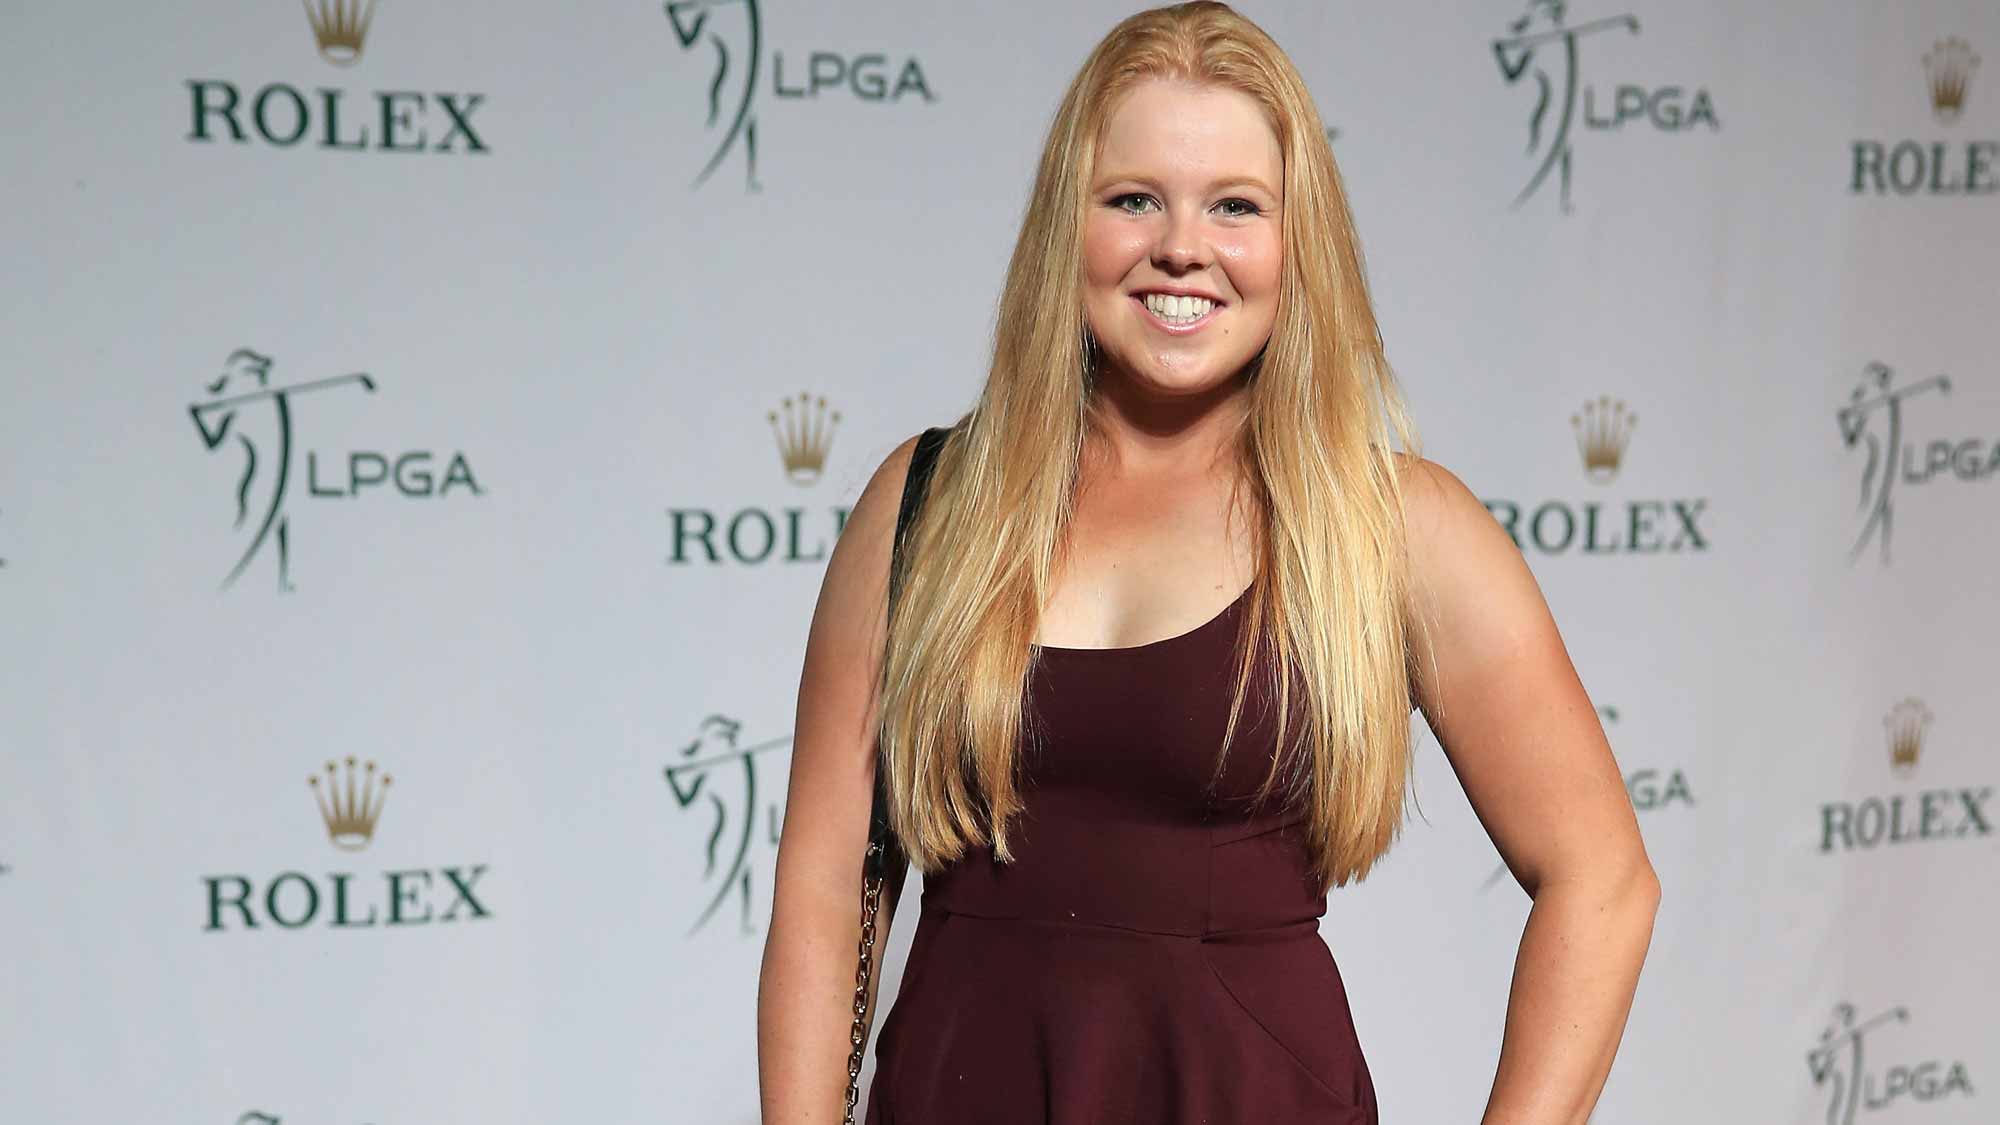 LPGA player Stephanie Meadow of Northern Ireland poses on the red carpet as she arrives to the LPGA Rolex Players Awards at the Ritz-Carlton, Naples